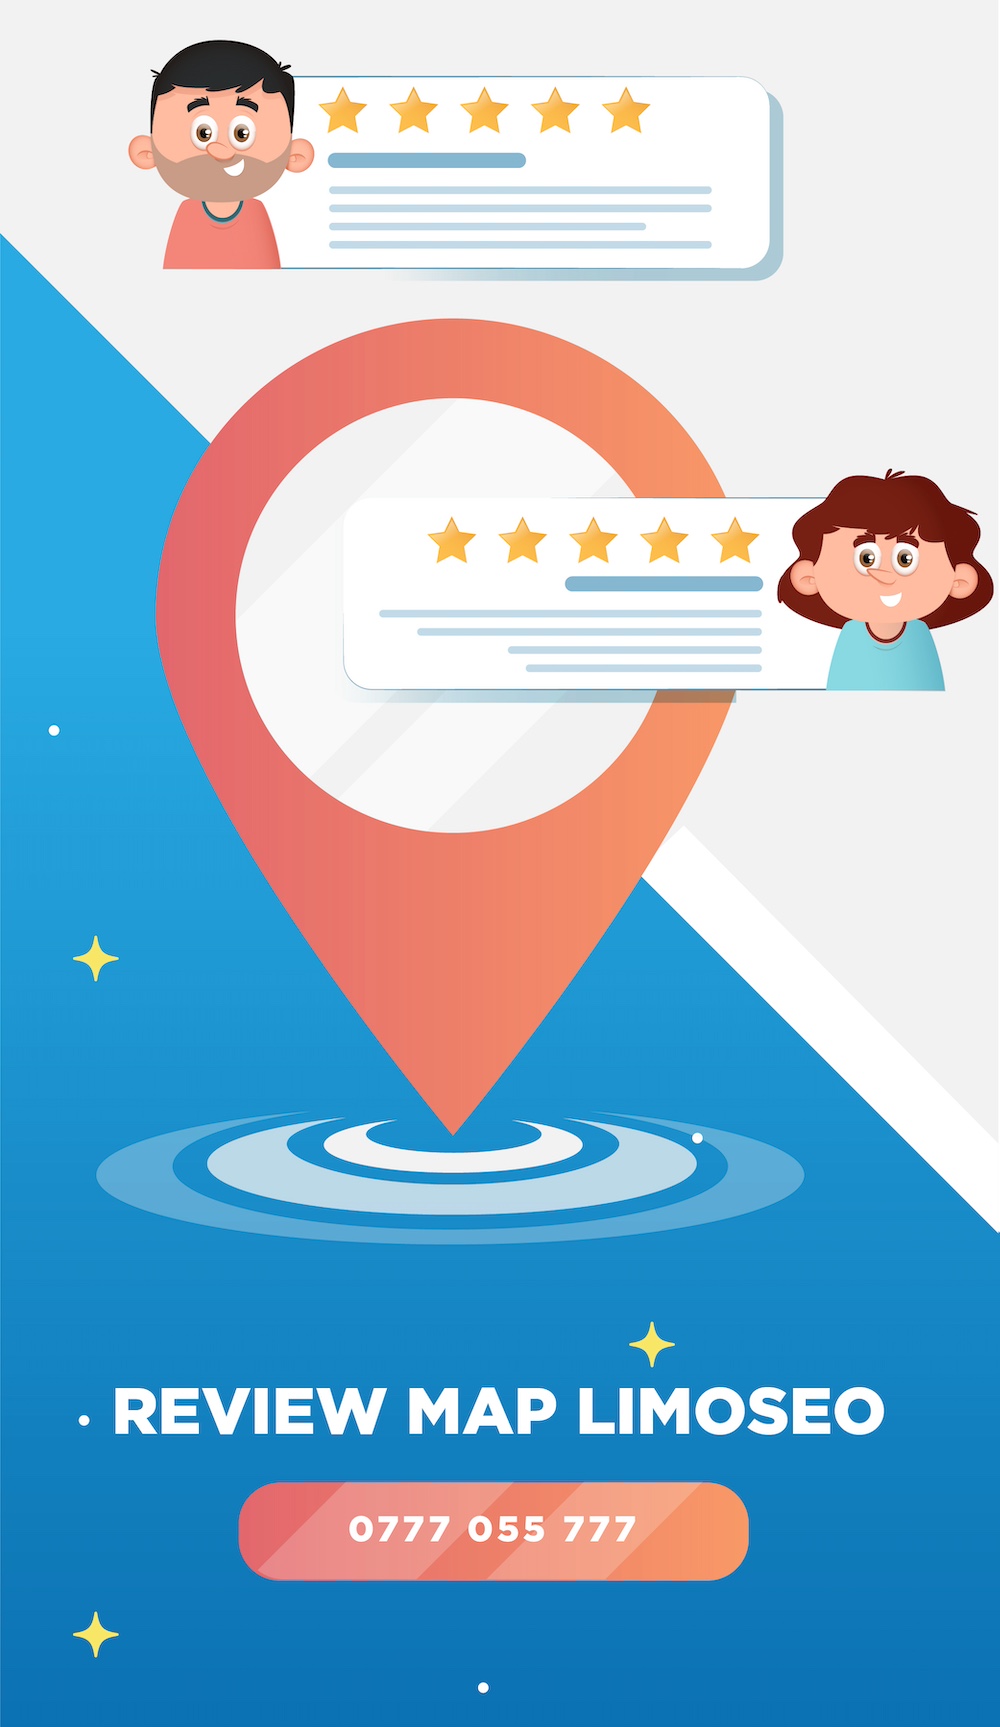 Dịch vụ review maps limoseo